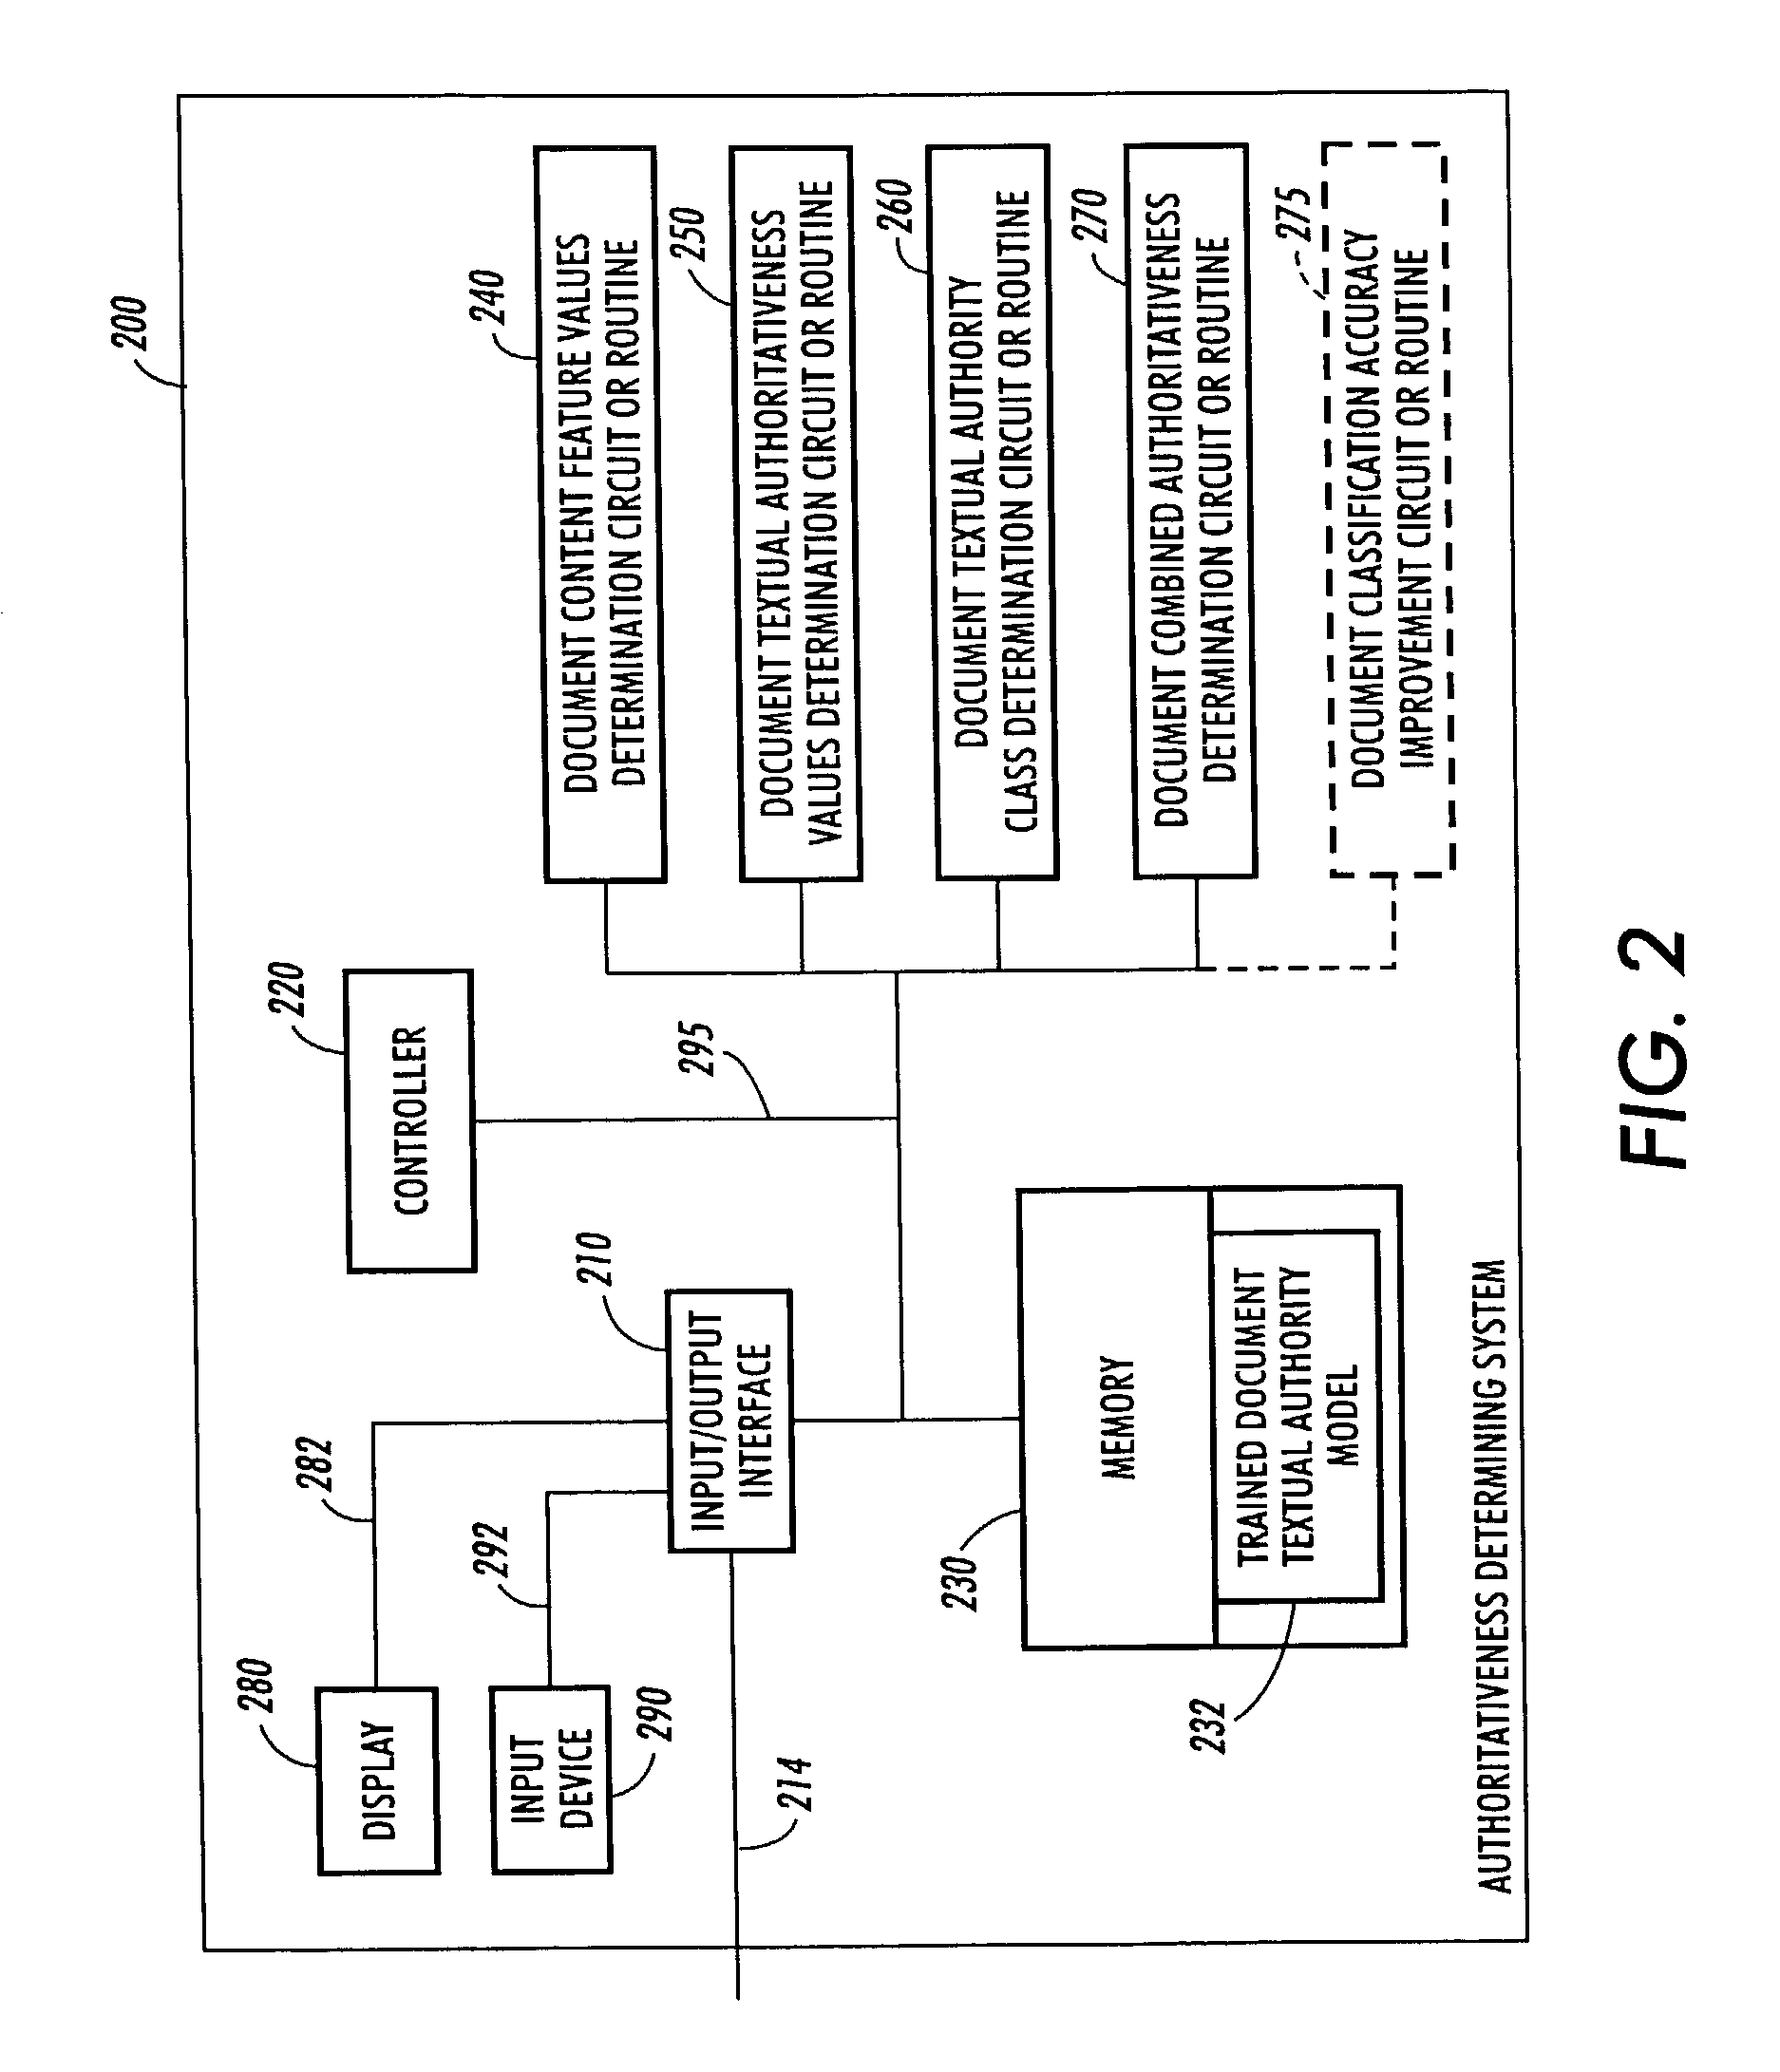 Systems and methods for authoritativeness grading, estimation and sorting of documents in large heterogeneous document collections